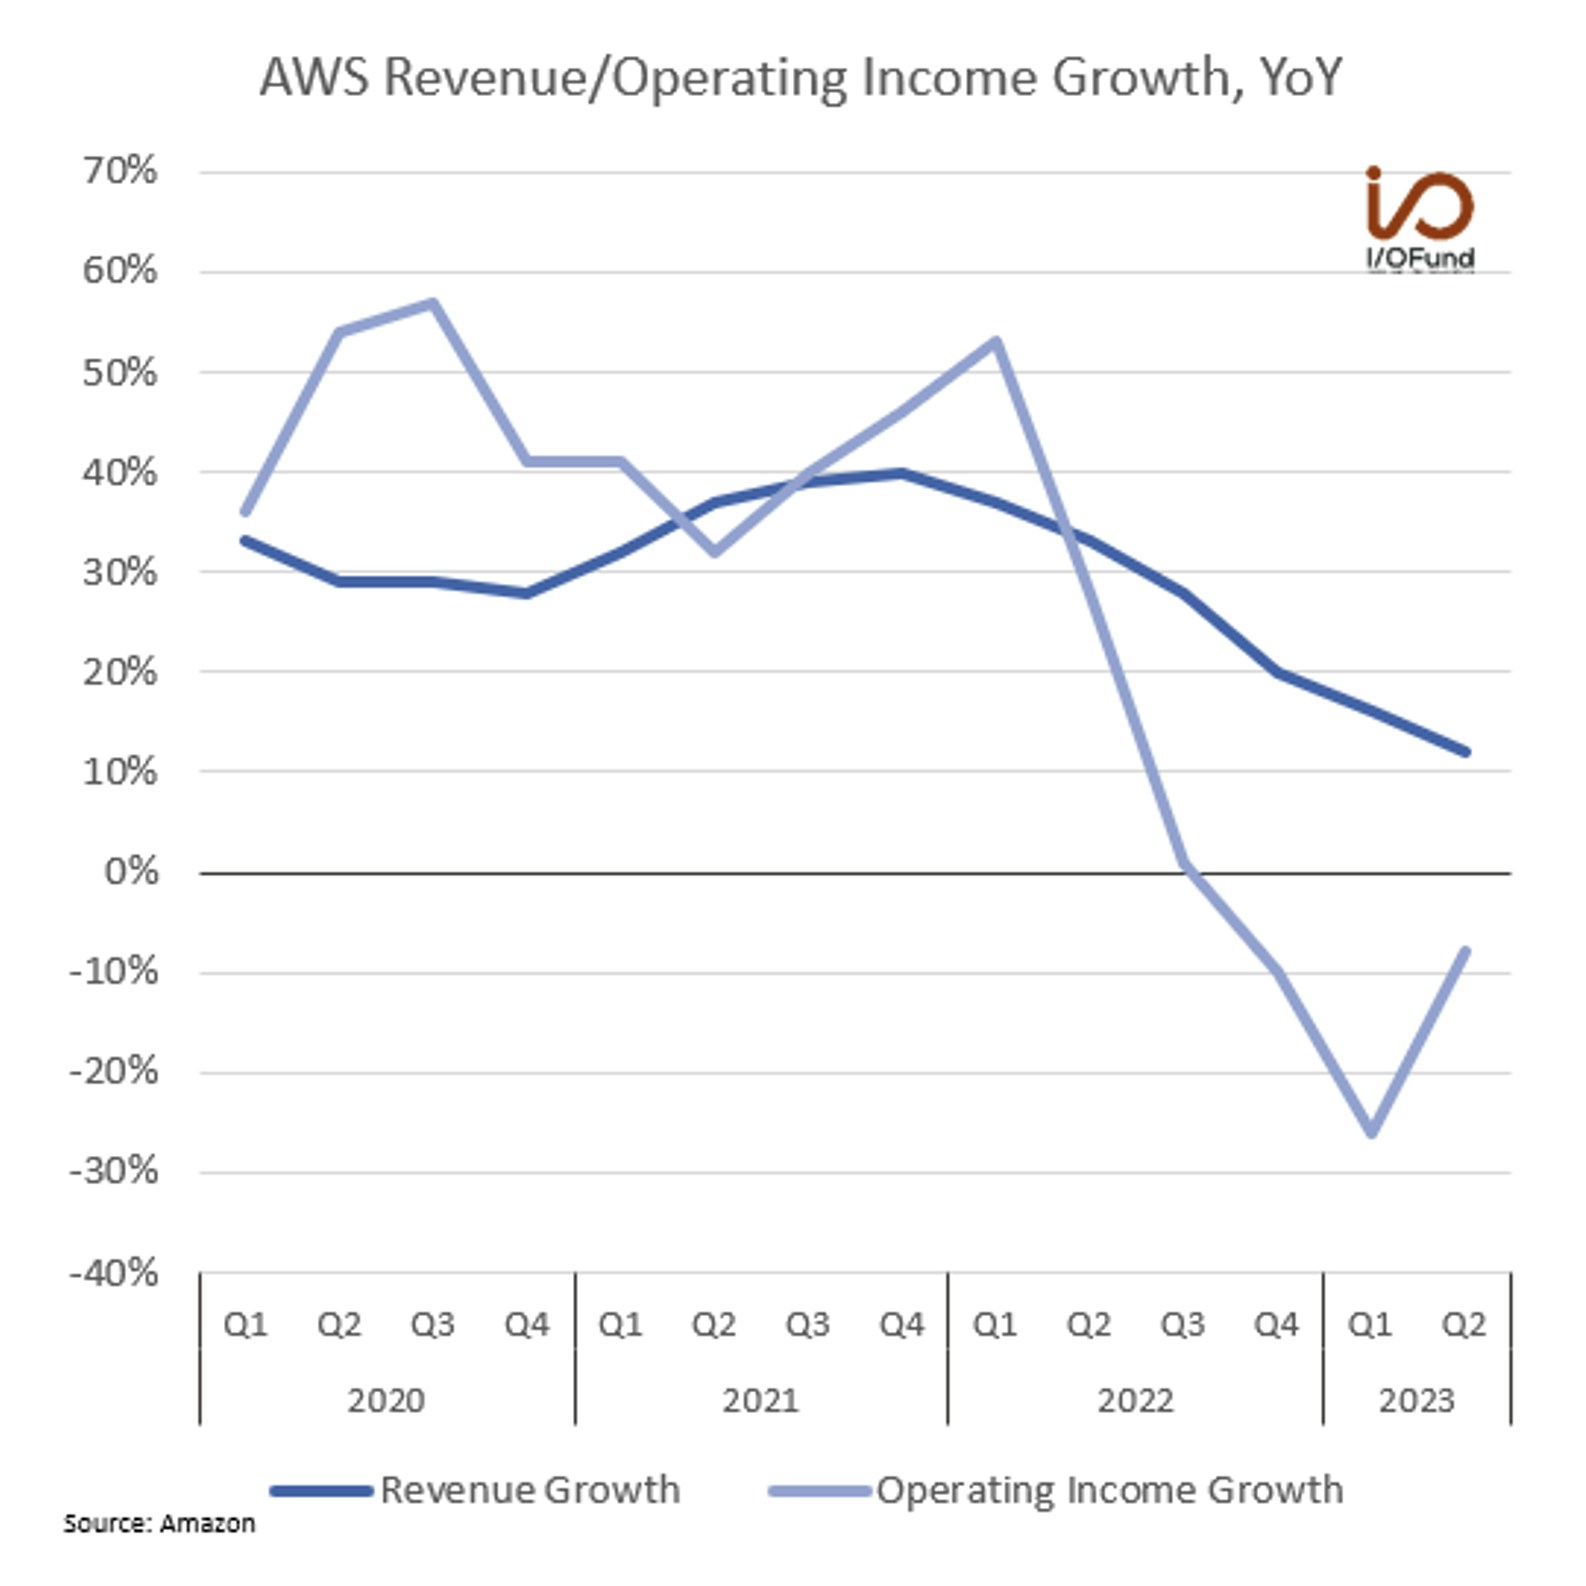 AWS Revenue/Operating Income Growth, YoY